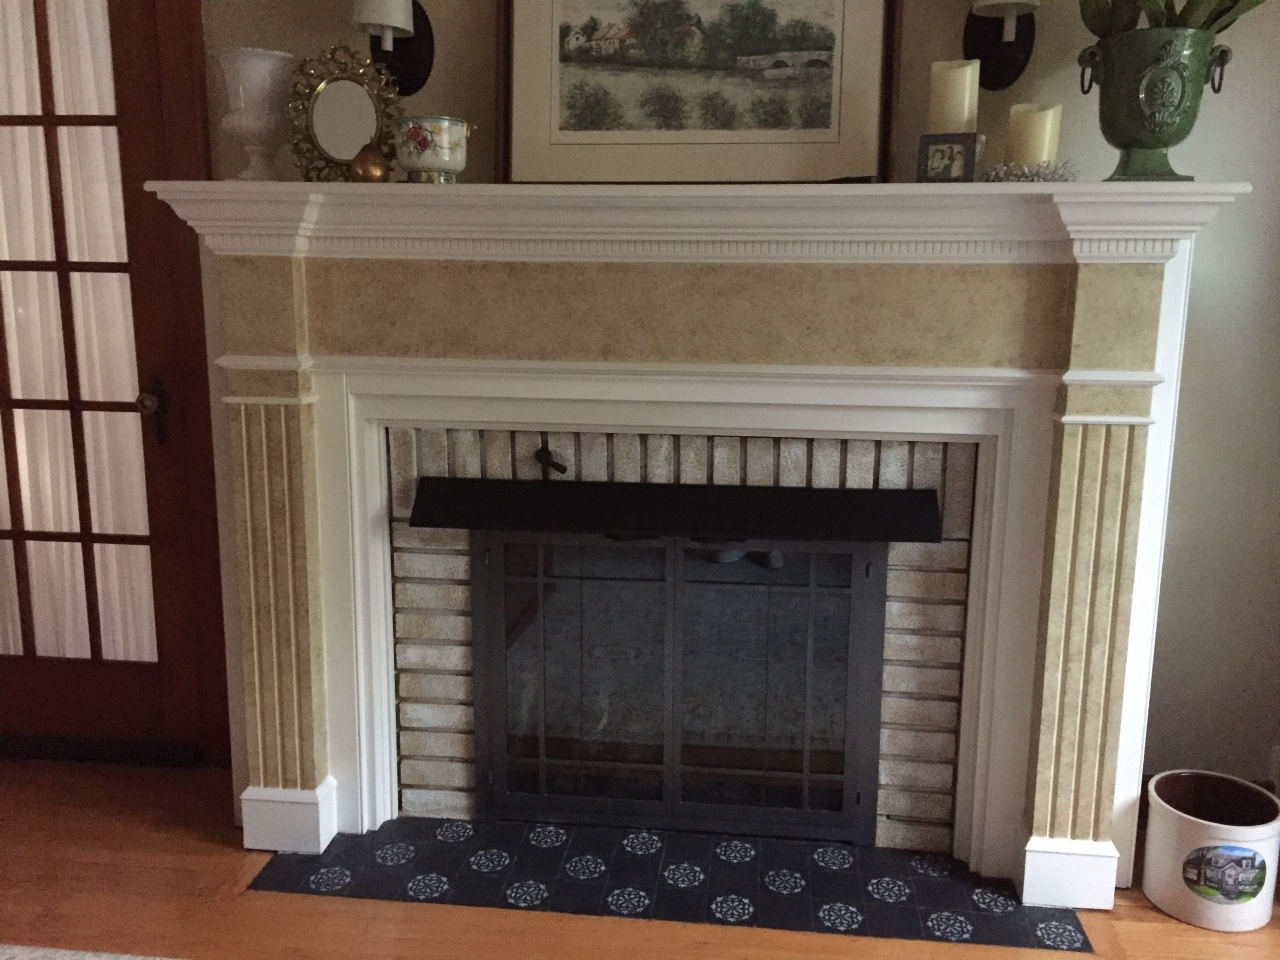 Fireplace Screen Ideas New Cost to Install Gas Fireplace In Existing Fireplace